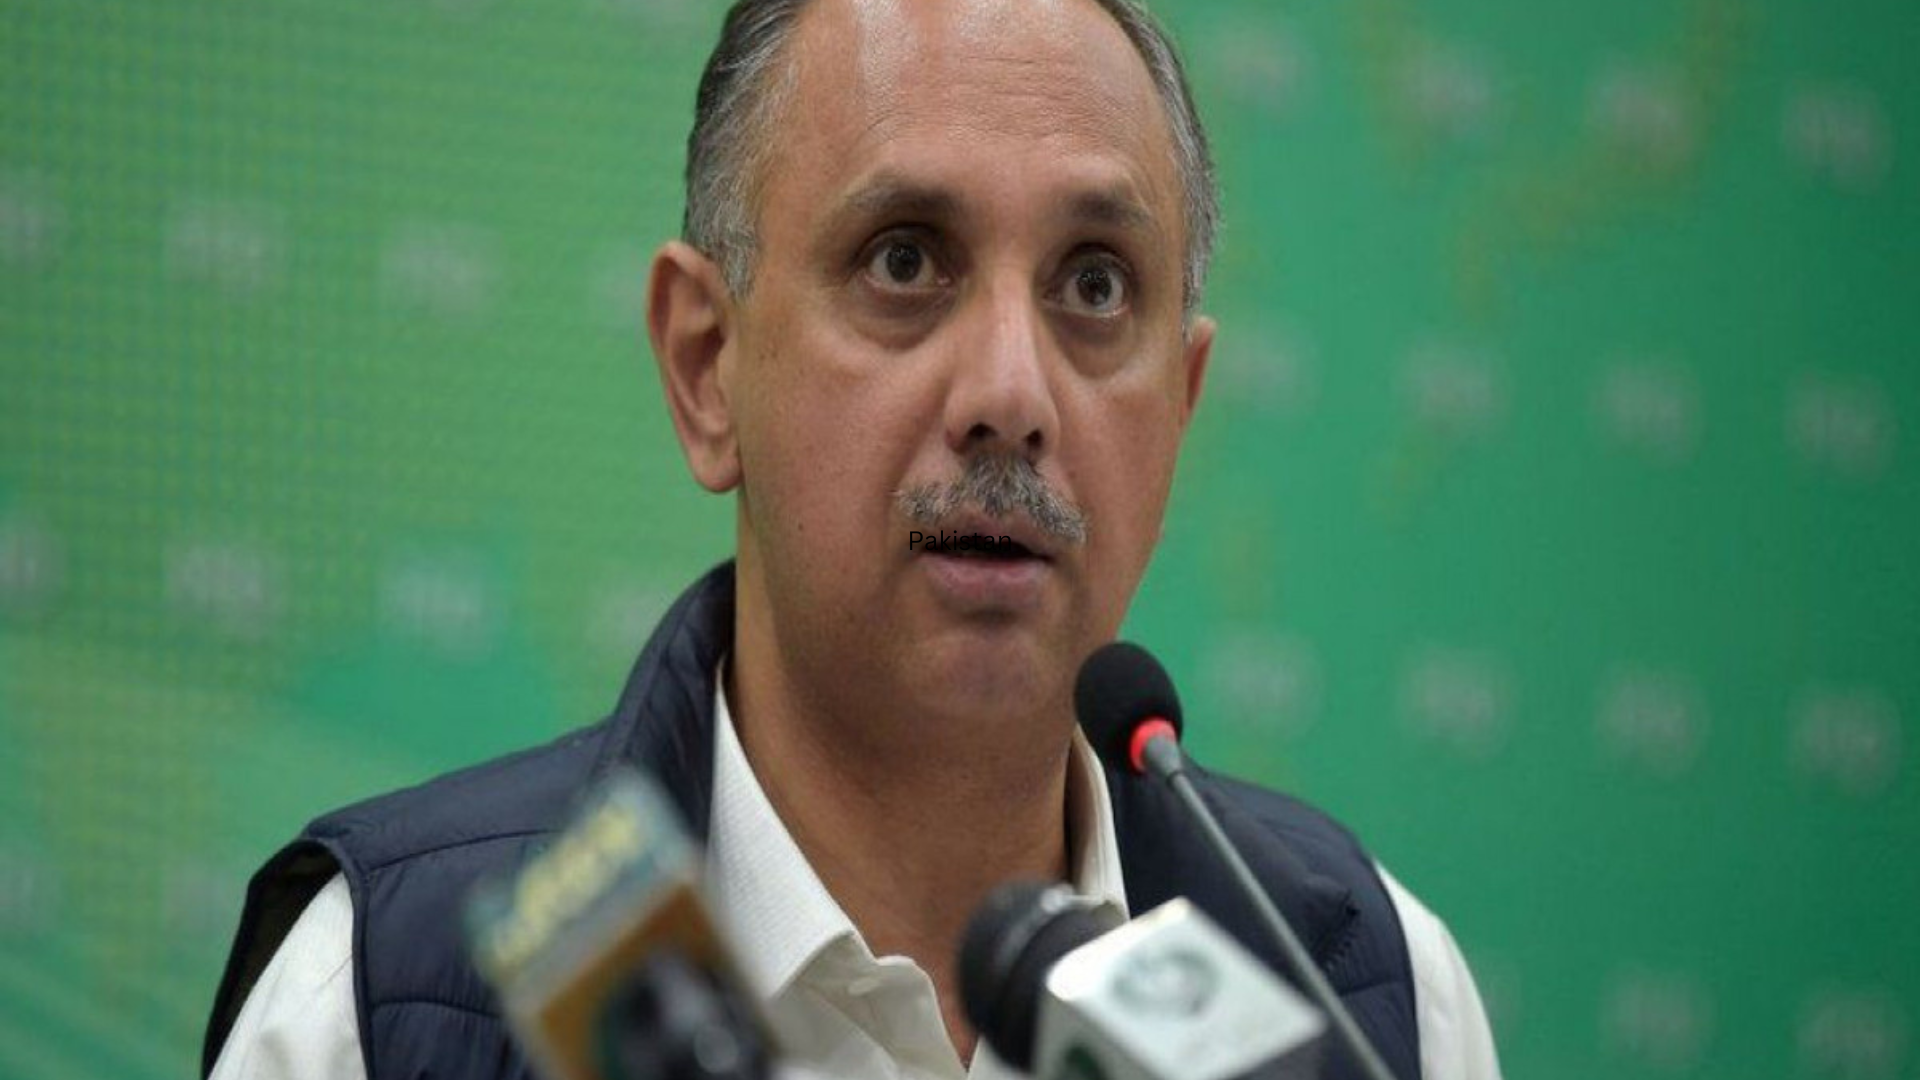 Pakistan Presidential Polls: Imran Khan’s Party Leader Omar Ayub Calls Elections “Null and Void”